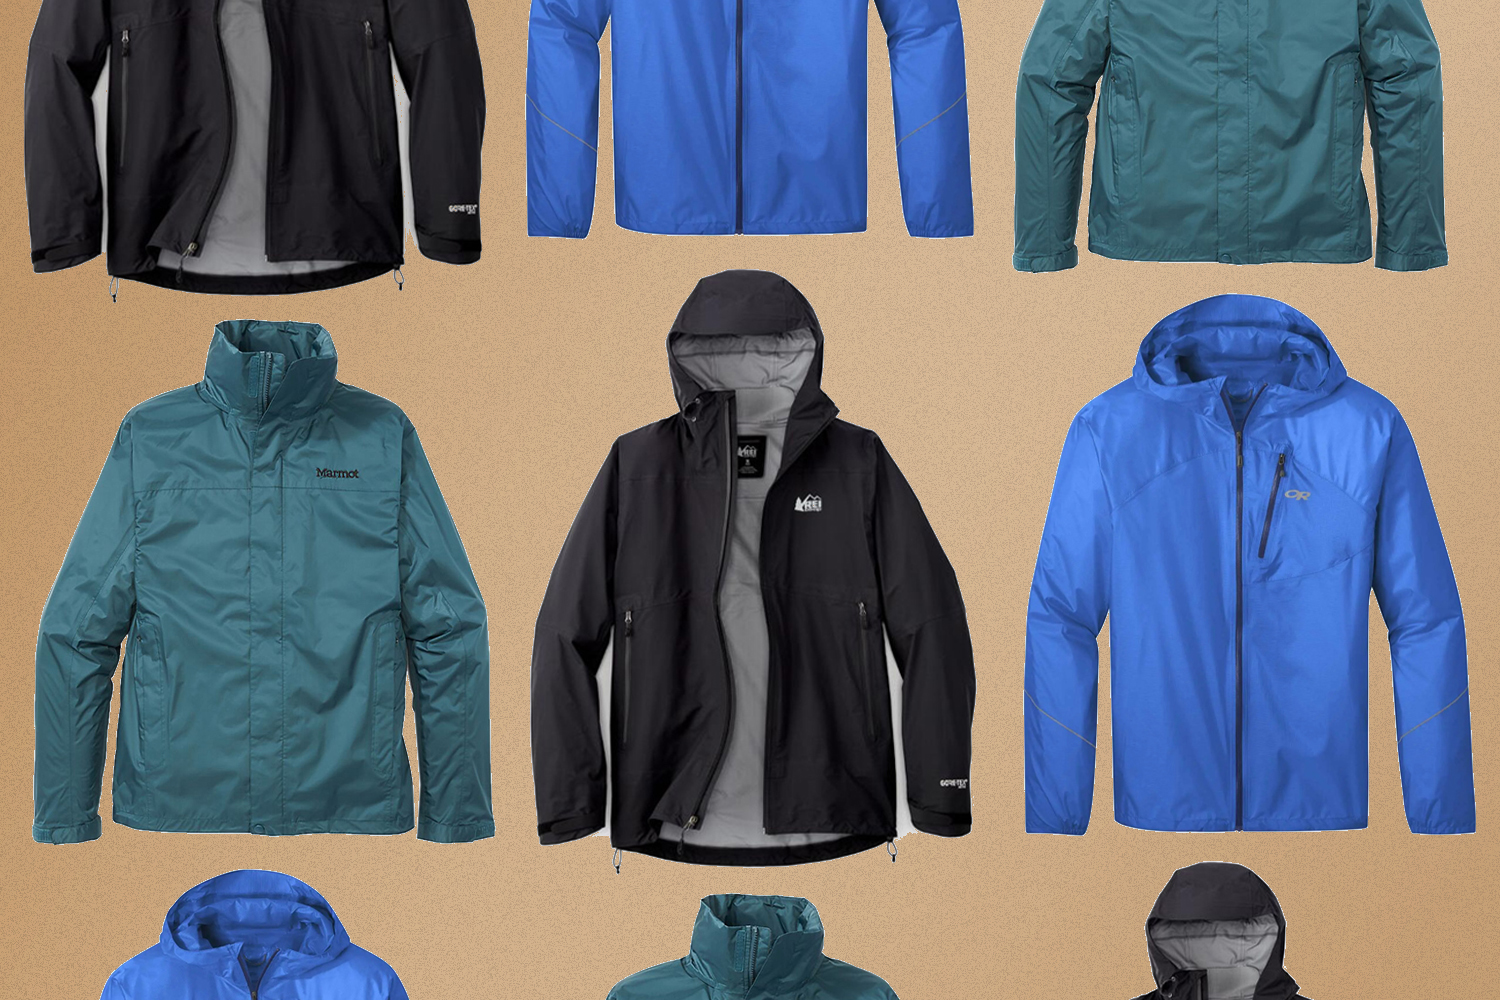 These are the best men's rain jackets in 2022 with inclusions from Patagonia, Arc'teryx, REI Co-op, Marmot, The North Face and many more